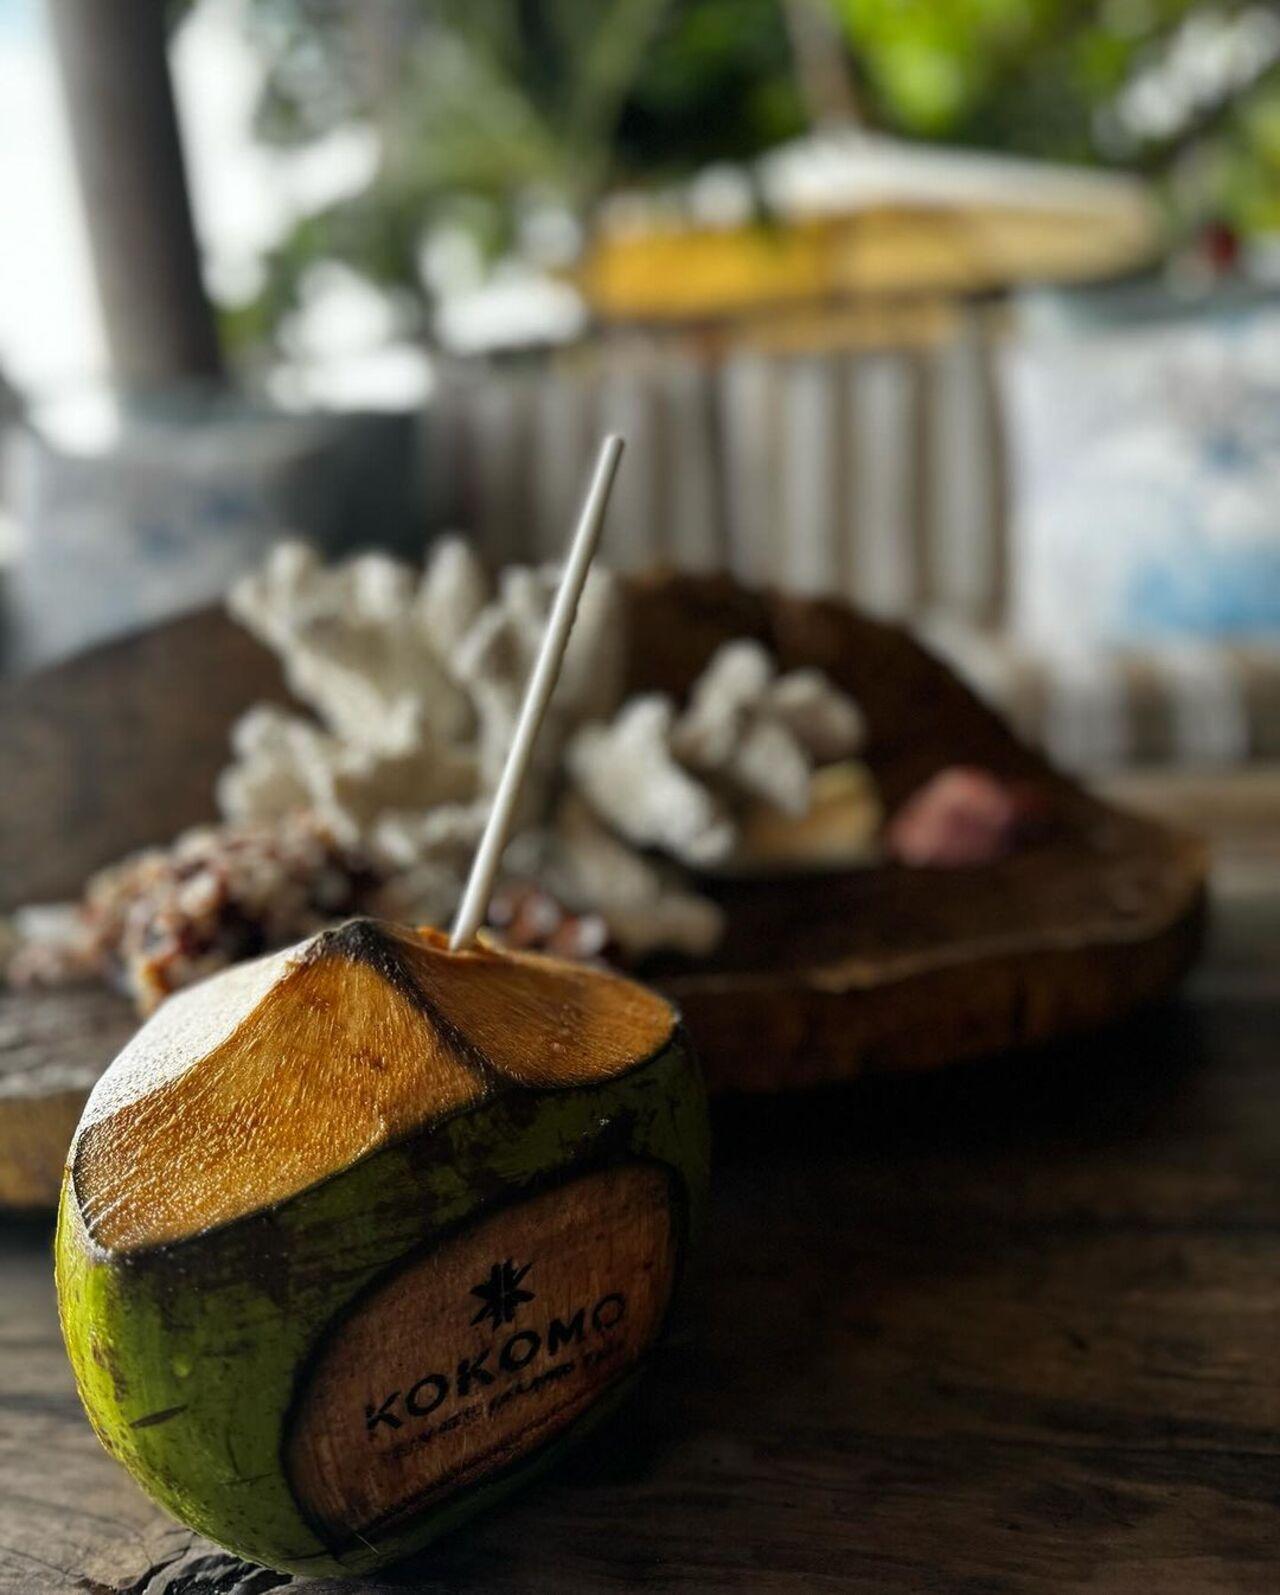 They were welcomed with the most refreshing natural drink - coconut water- perfect for beating the heat. 